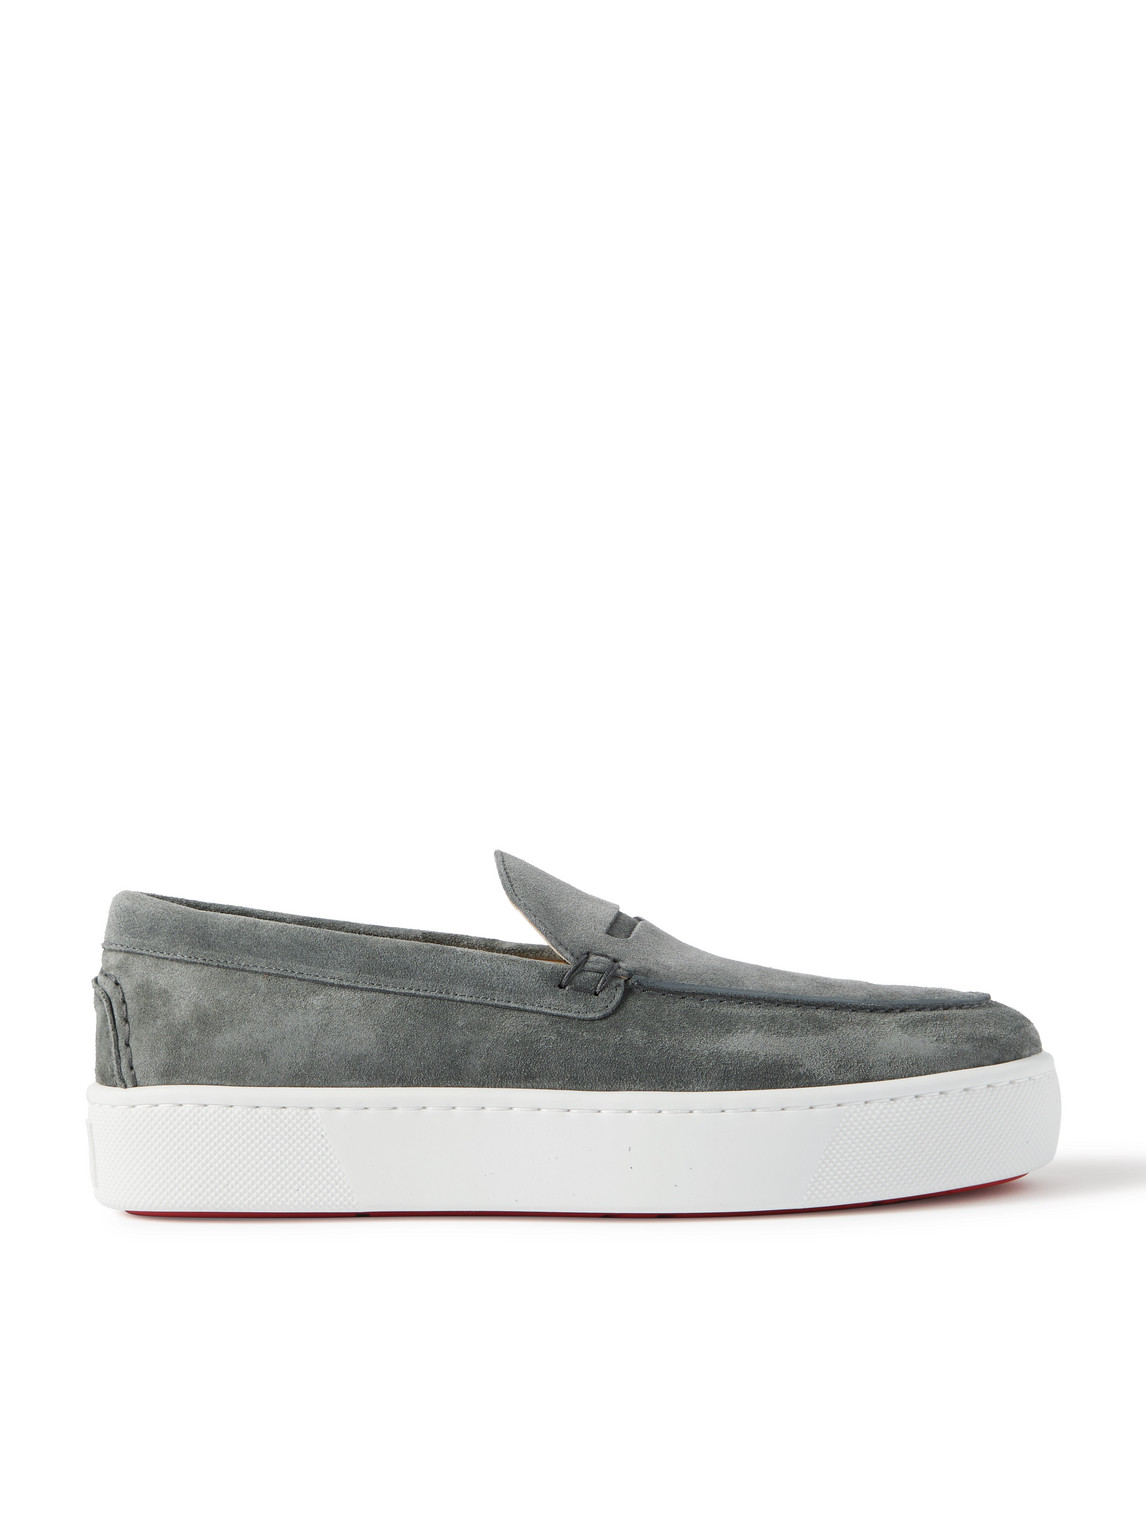 Christian Louboutin Paqueboat Suede Penny Loafers In Grey